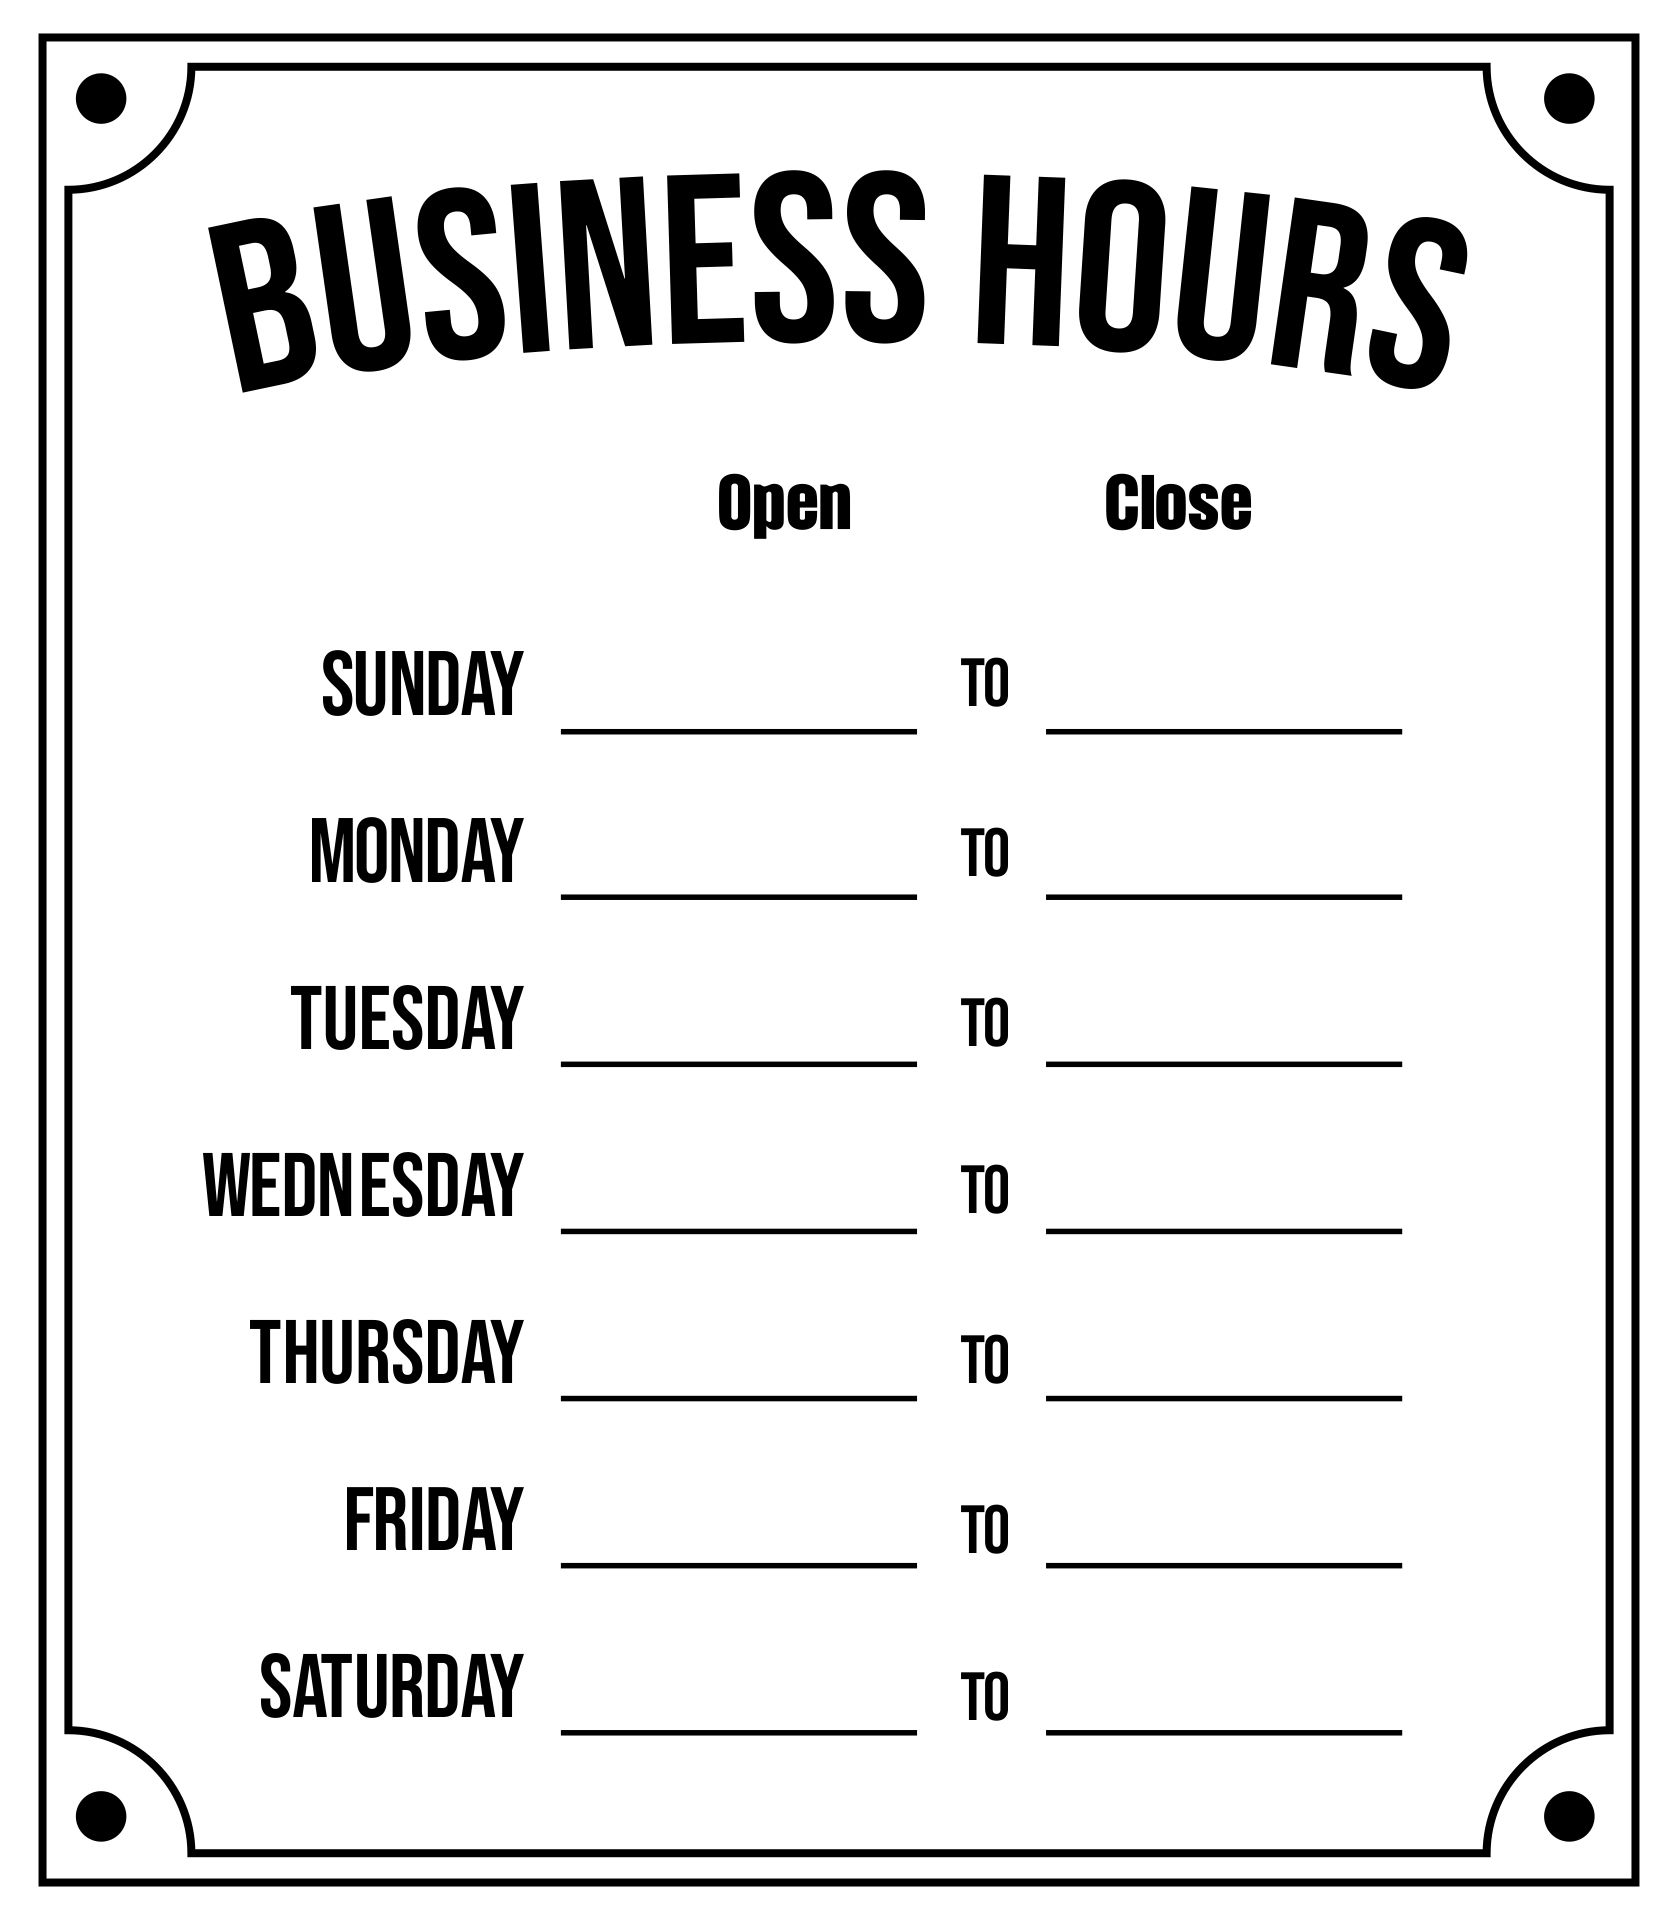 Business Hours Sign Template 10 Free PDF Printables Printablee